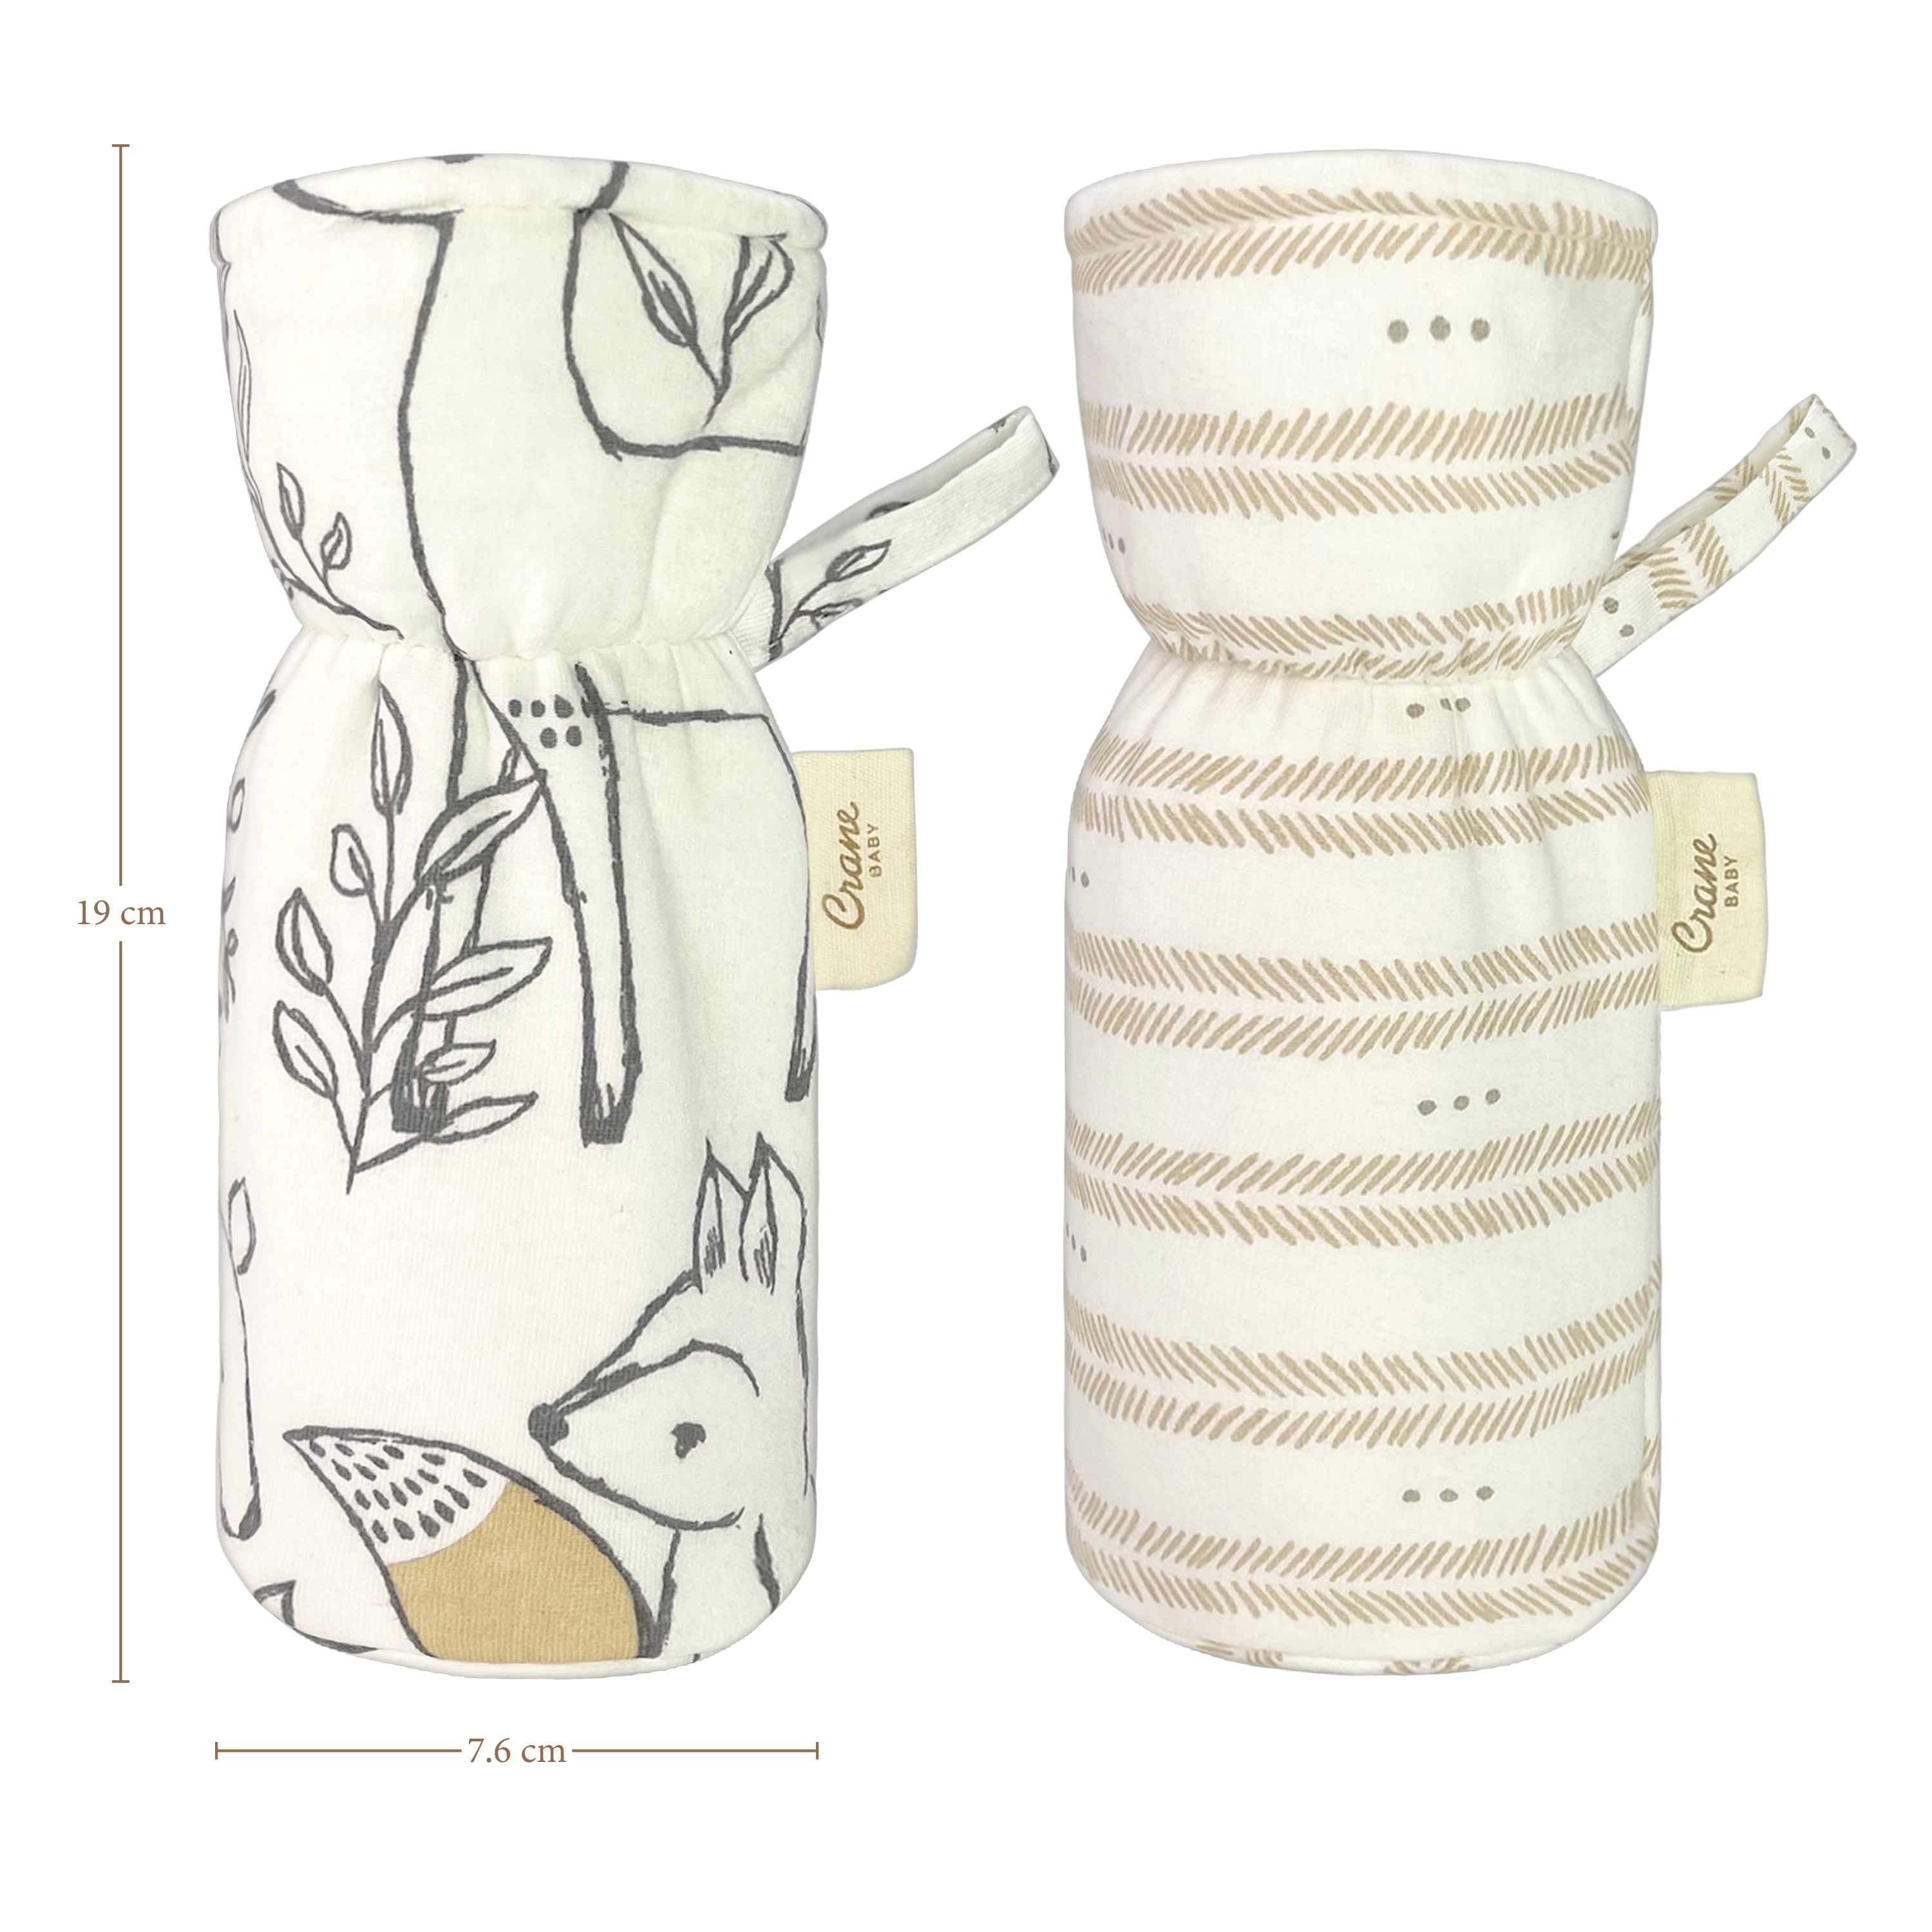 Crane Baby Bottle Cover/Warmer Ezra Collection, Pack of 2 - Multicolor